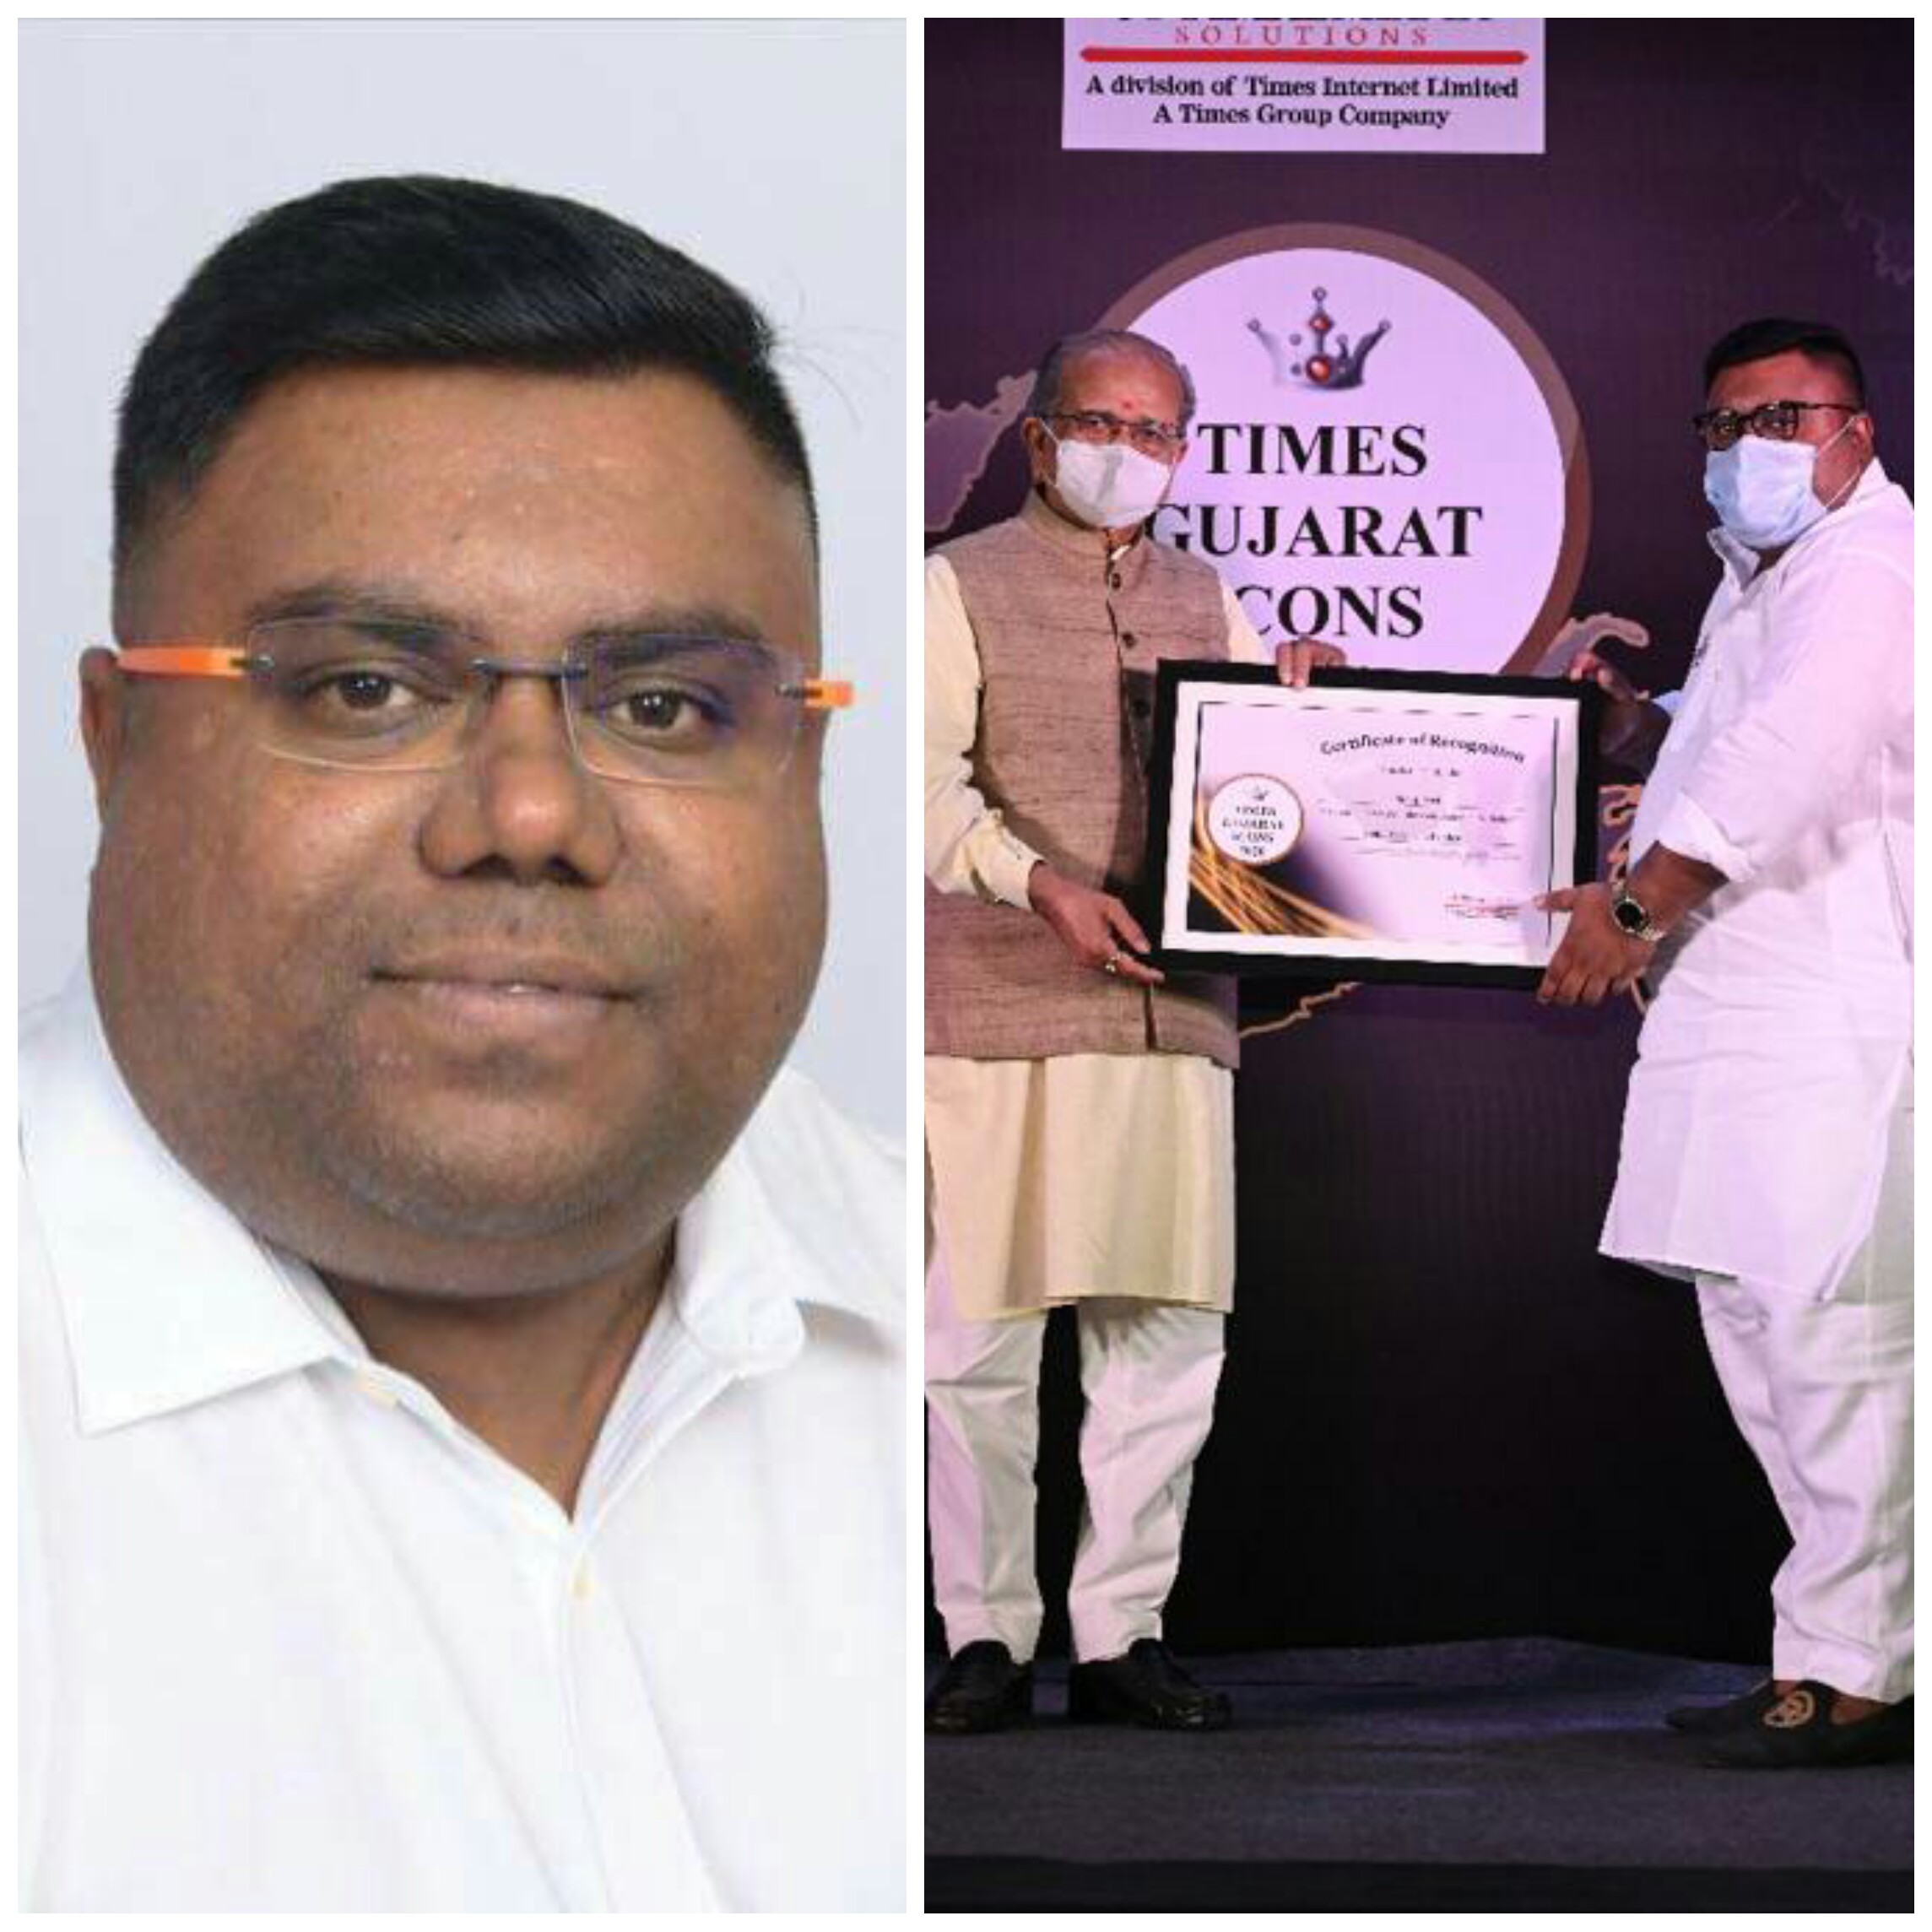 Mr. Tanuj Patel, Founder of Roots Foundation was awarded the Times Gujarat Icon 2020 Award